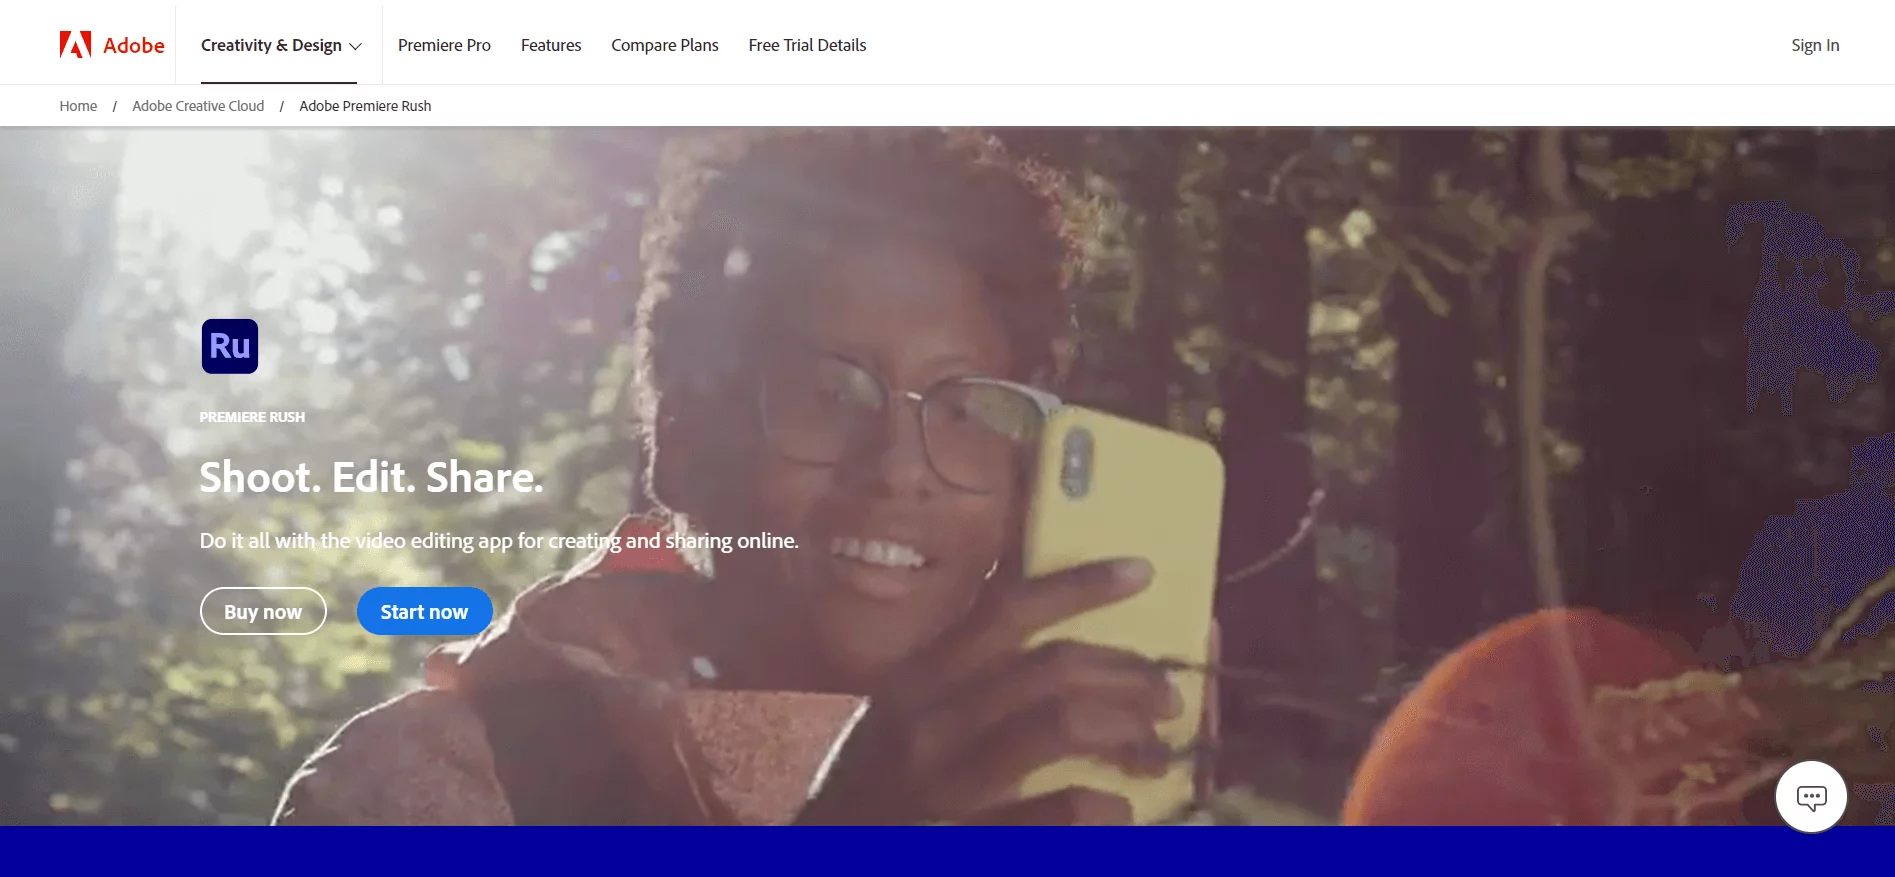 Adobe Rush homepage featuring a woman with glasses holding a smartphone in a sunlit forest, emphasizing the "Shoot. Edit. Share." video editing app capabilities.